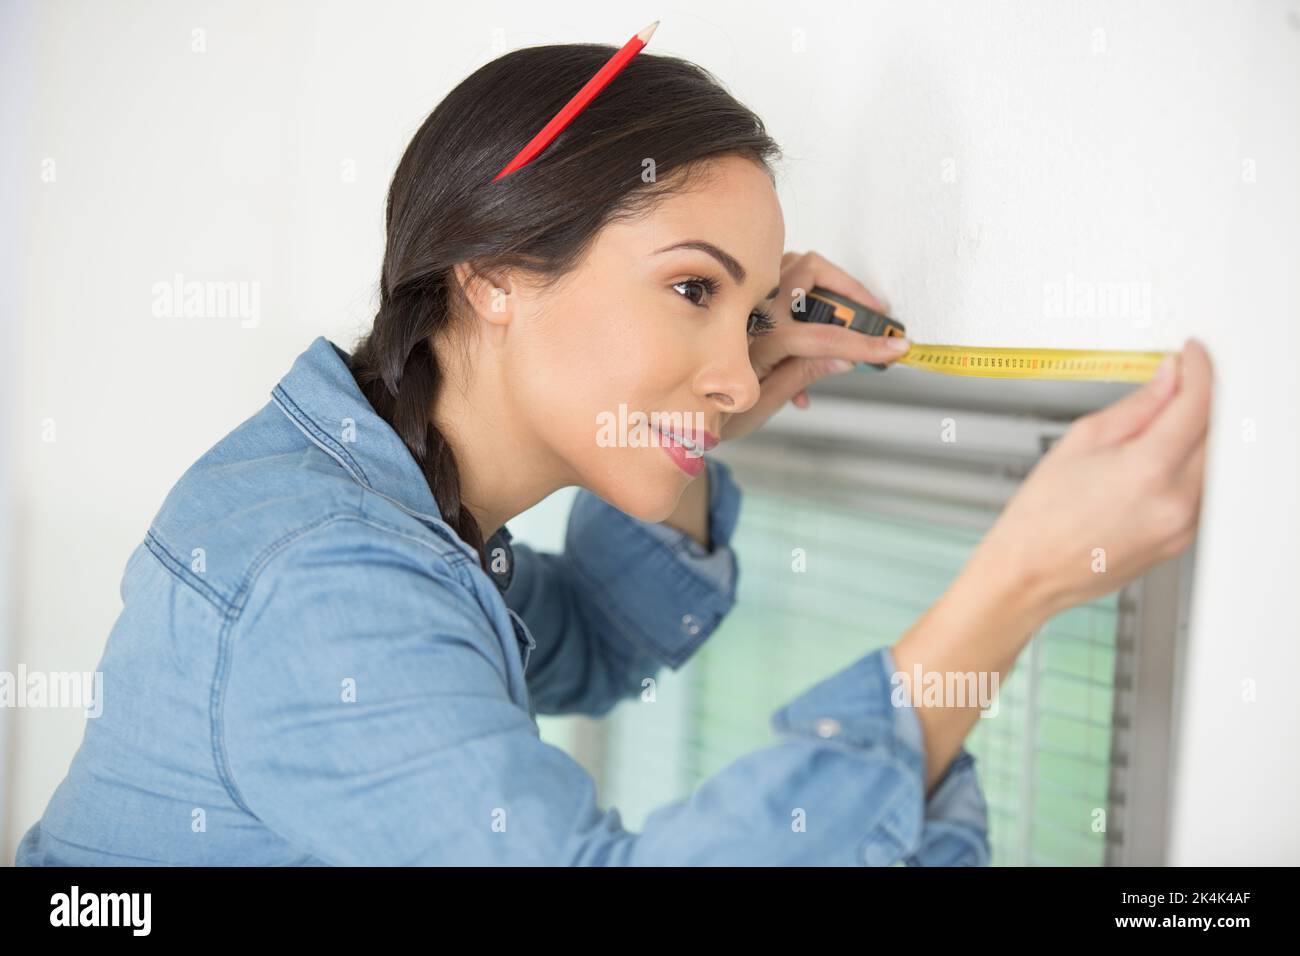 female worker measures a window Stock Photo